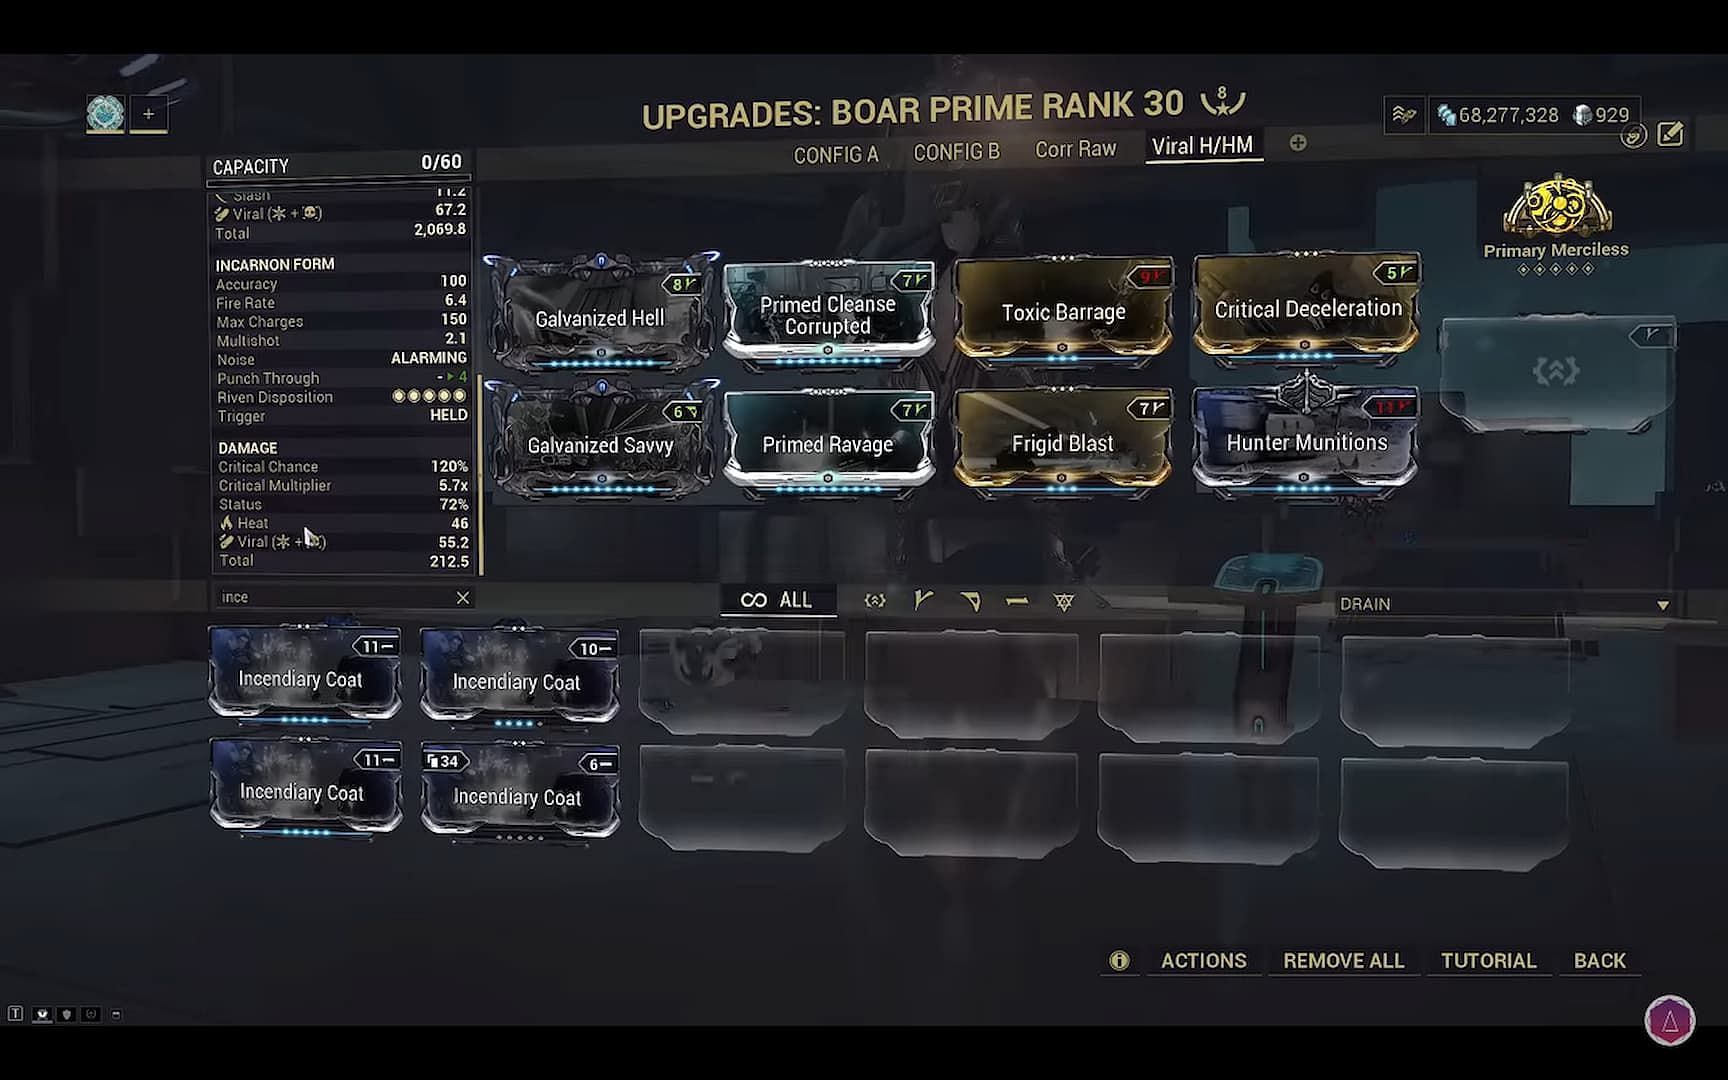 Warframe Incarnon Boar build with Galvanized Savvy and Hunter Munitions (Image via Digital Extremes)